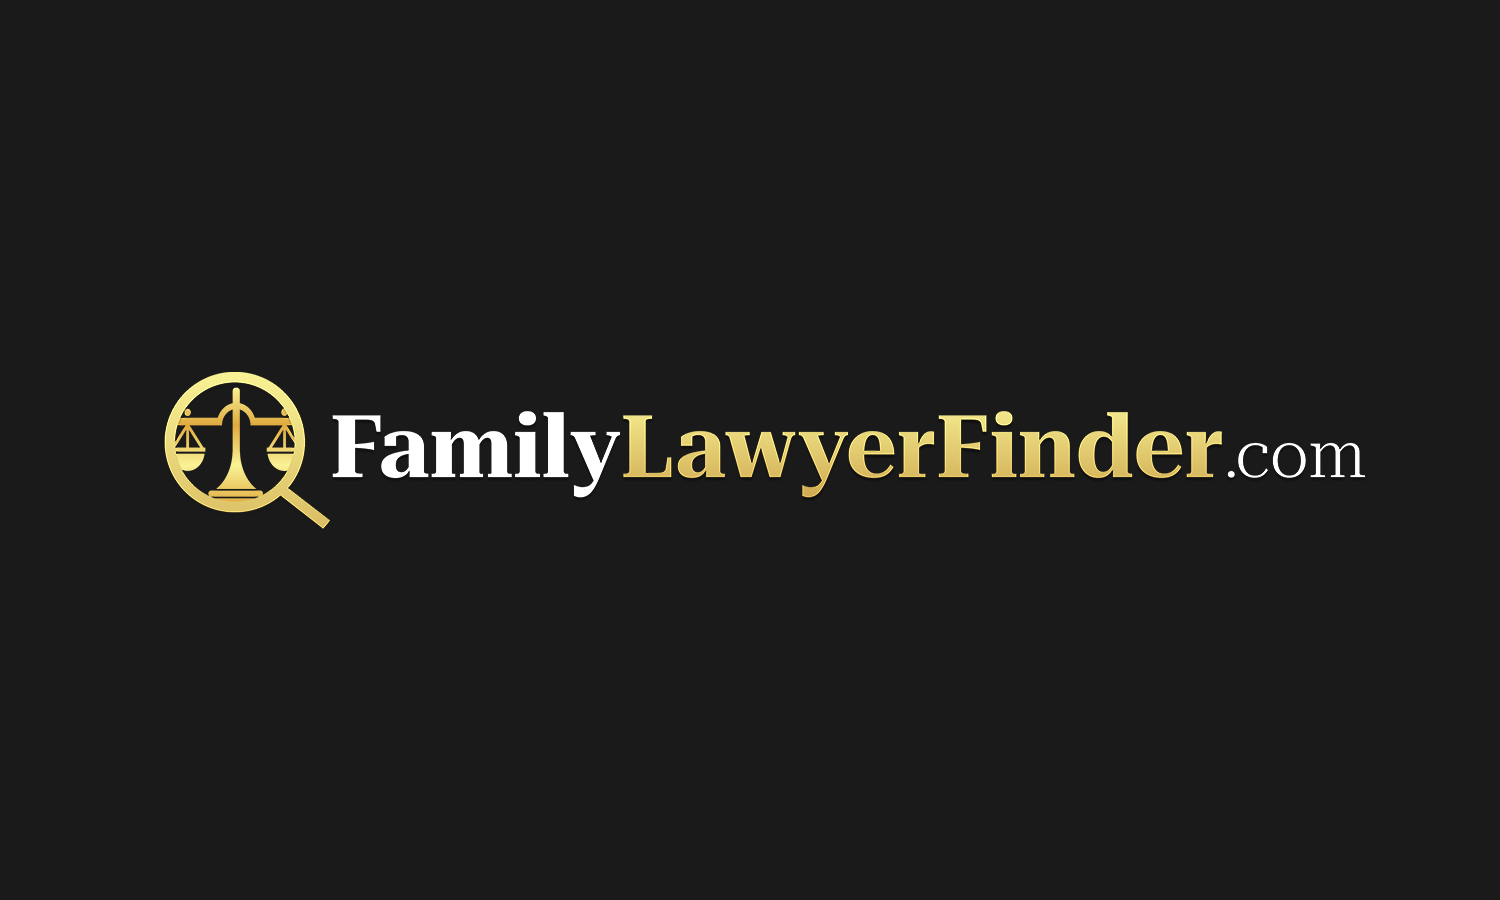 The Best 12 Family Lawyers In Boston (Updated 2023) | ⚖️ Top Rated Family Solicitors by Family Lawyer Finder Boston ™